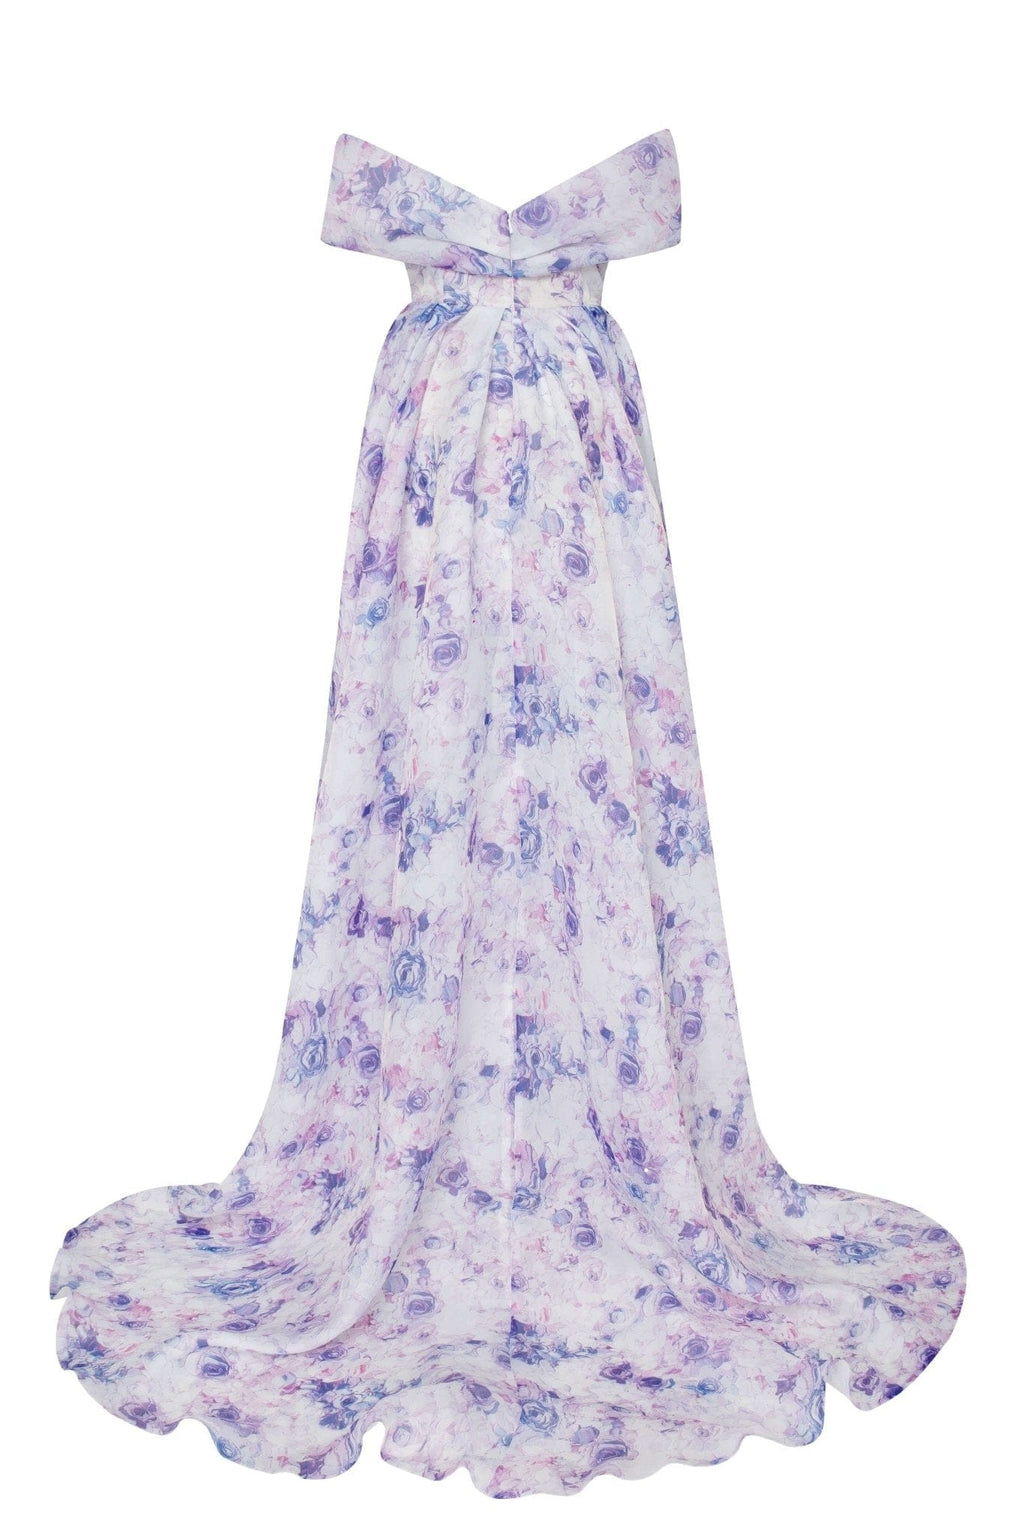 Blue Peony Chic off-the-shoulder floral maxi dress - Milla